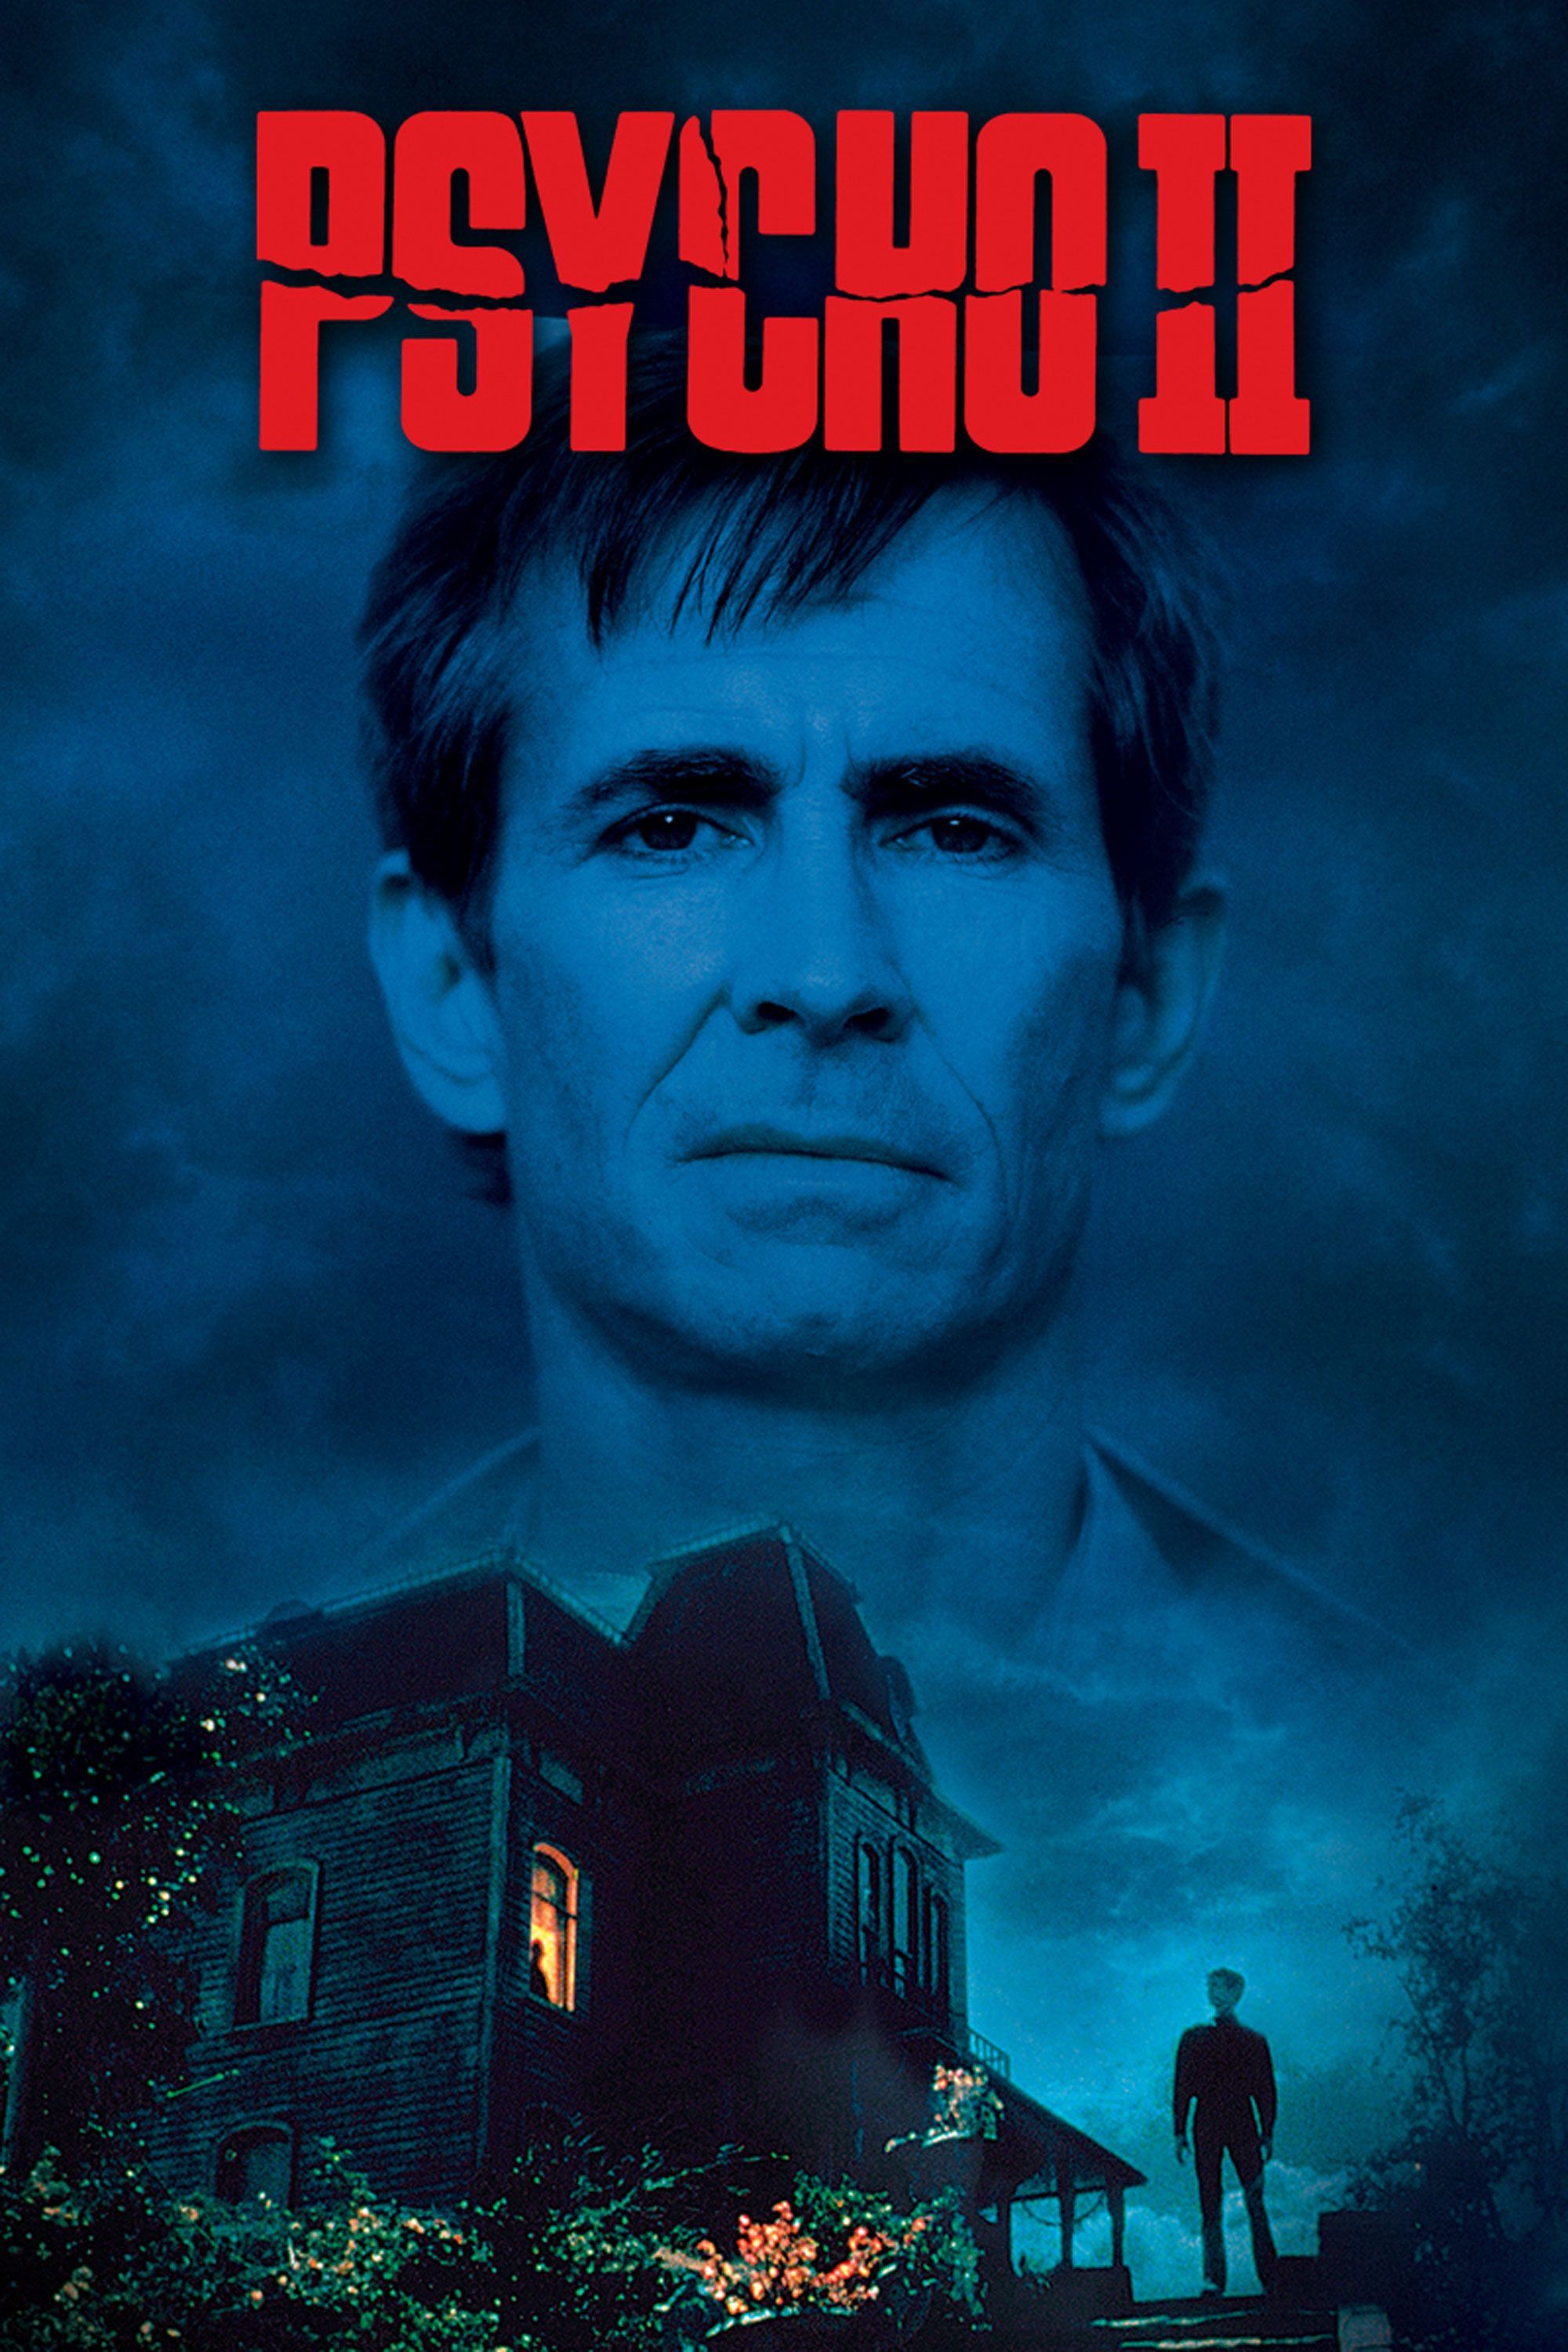 Psycho II poster with Anthony Perkins on the cover